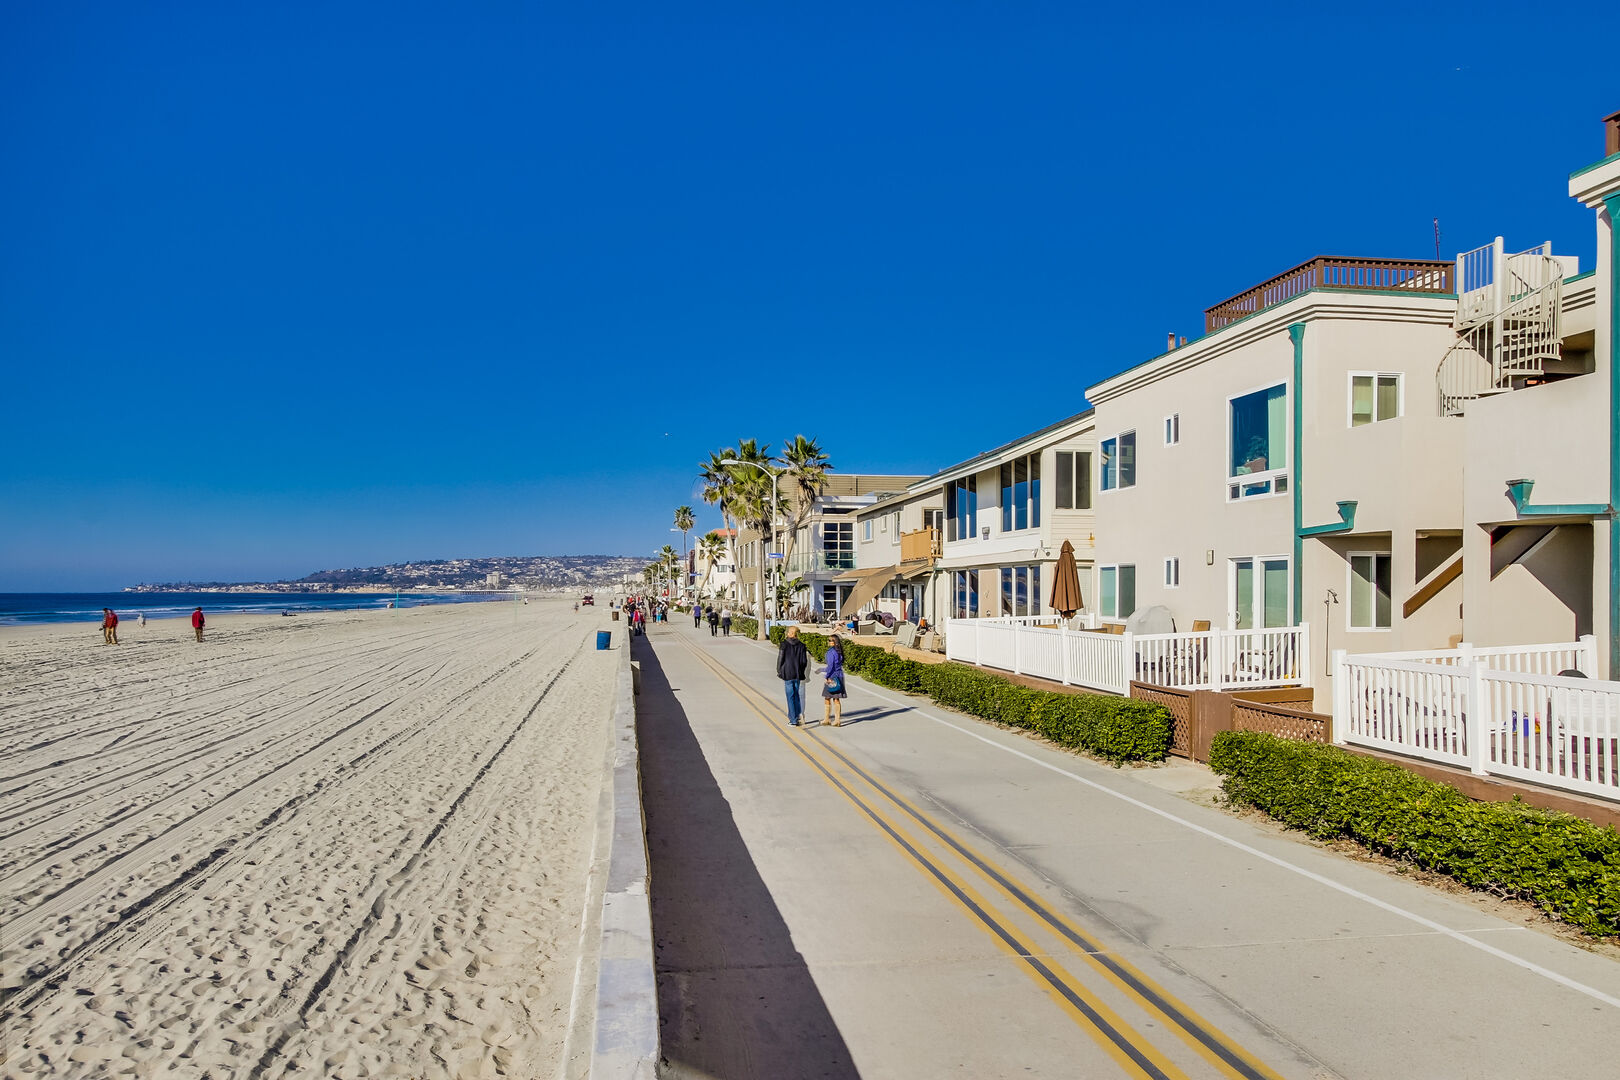 Stroll along the 6 mile oceanfront loop of the Pacific Beach/ Mission Beach boardwalk